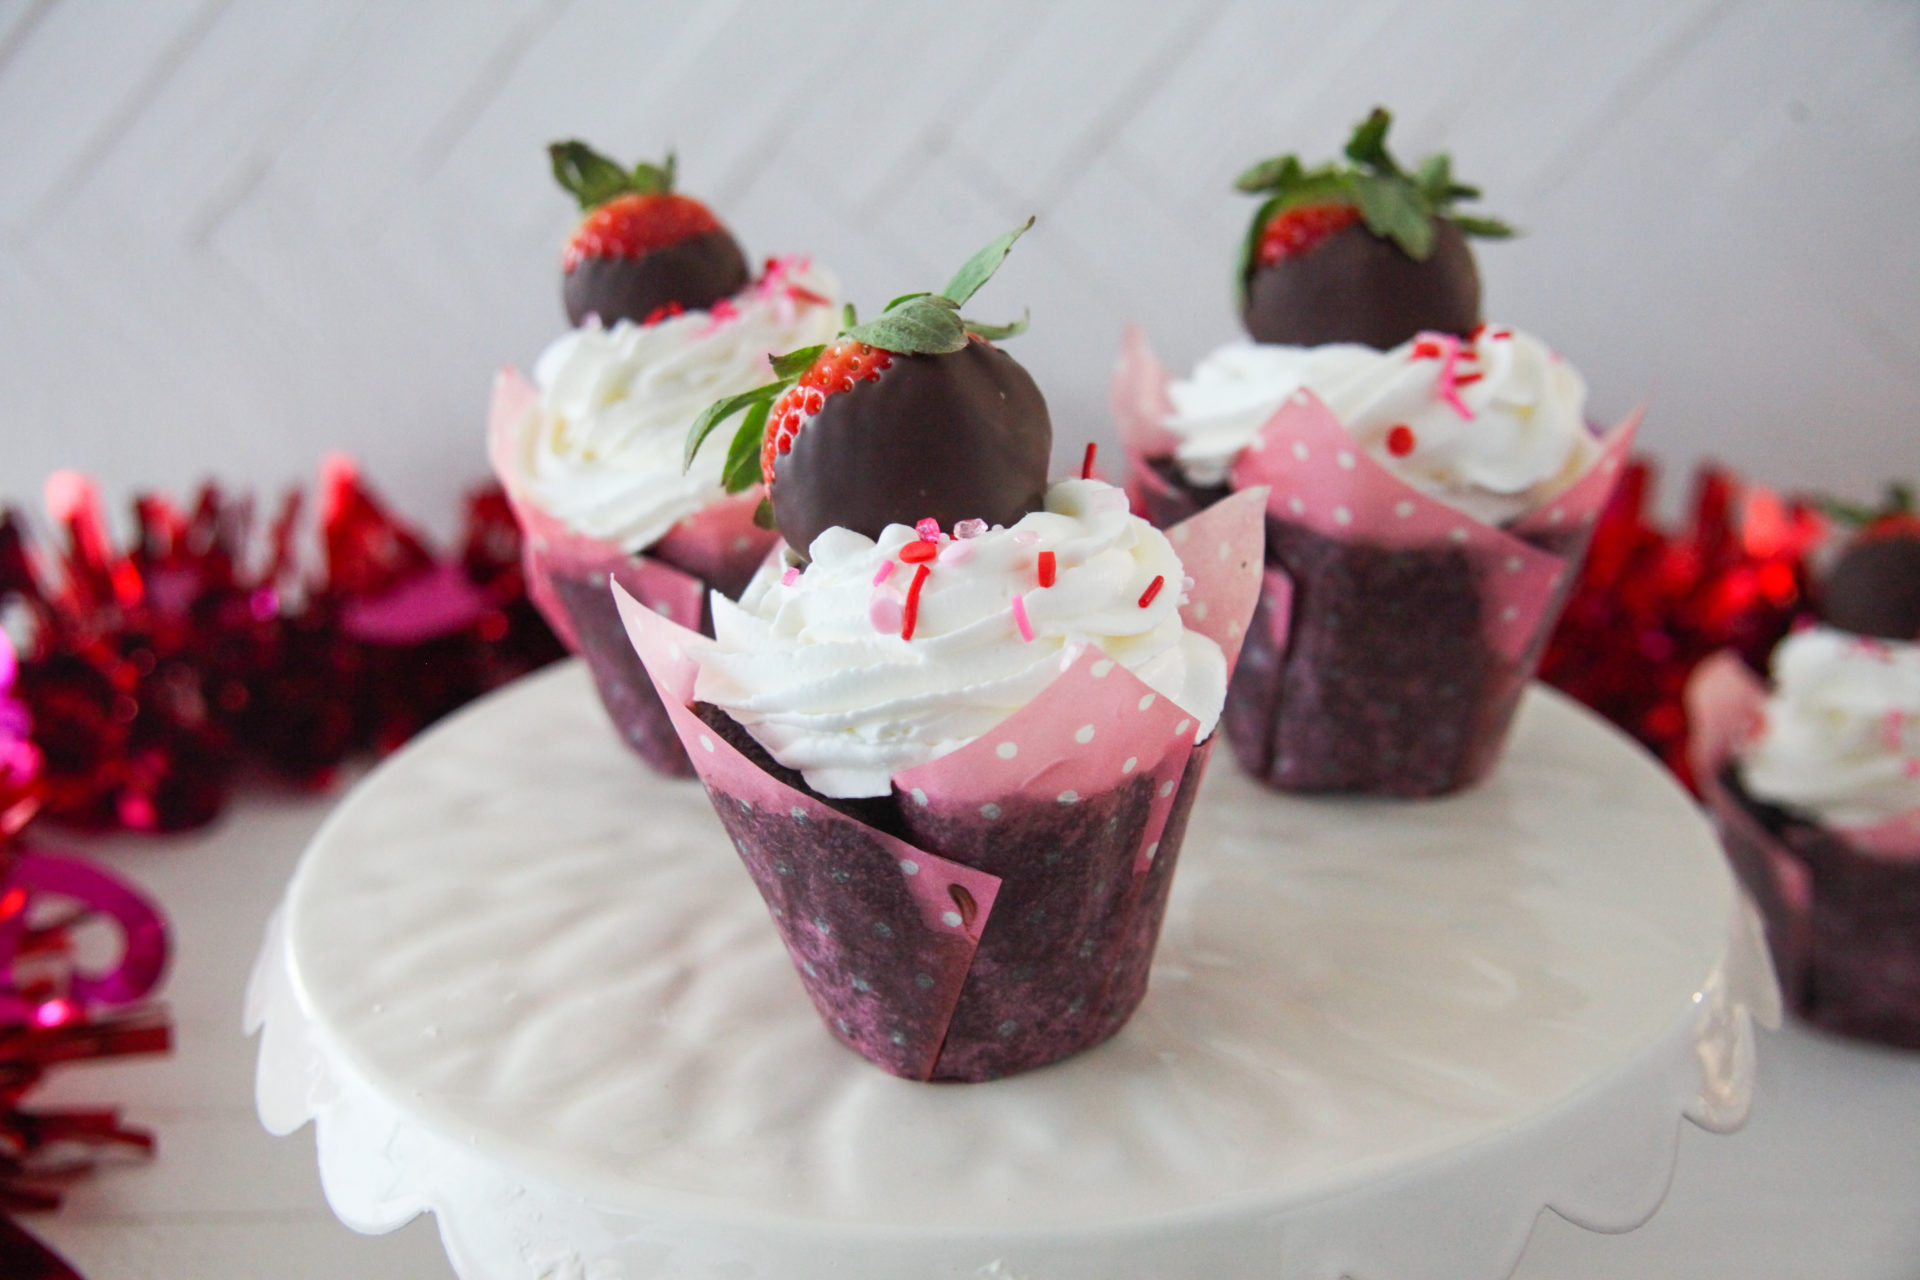 Chocolate Cupcakes Topped With Chocolate-Dipped Strawberries